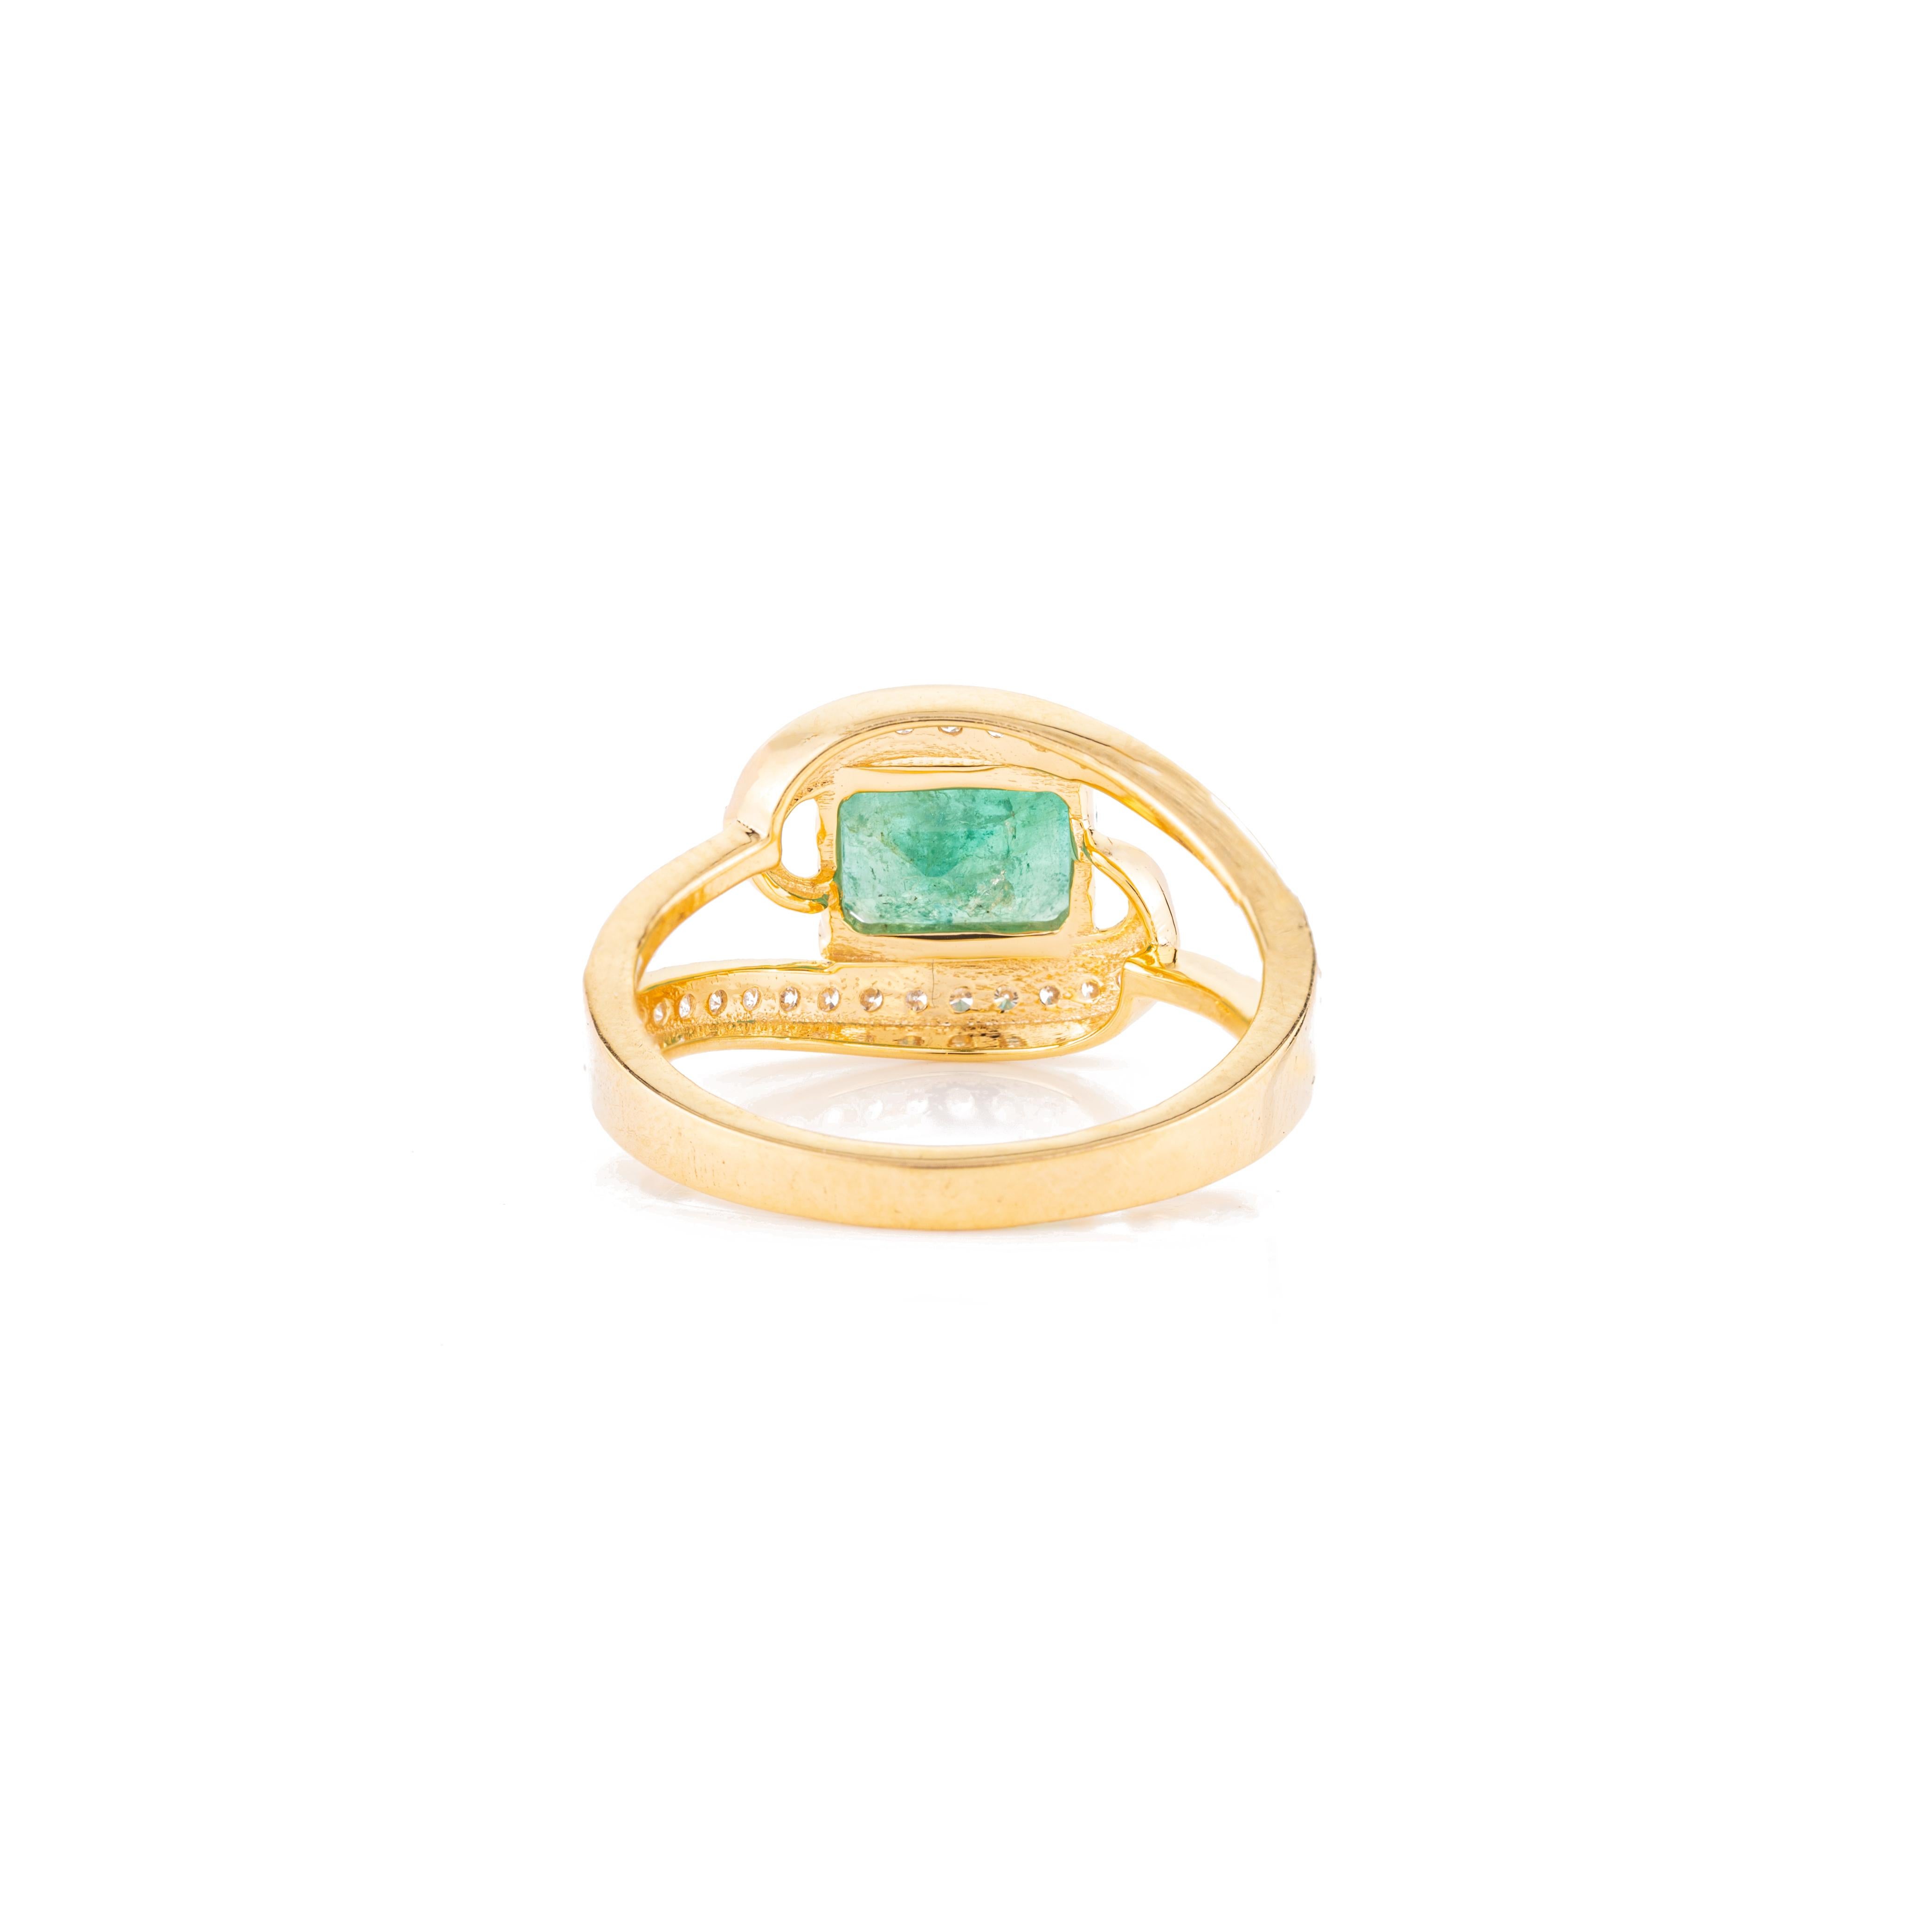 For Sale:  Magnificent Emerald and Diamond Wedding Ring in 18k Solid Yellow Gold 7